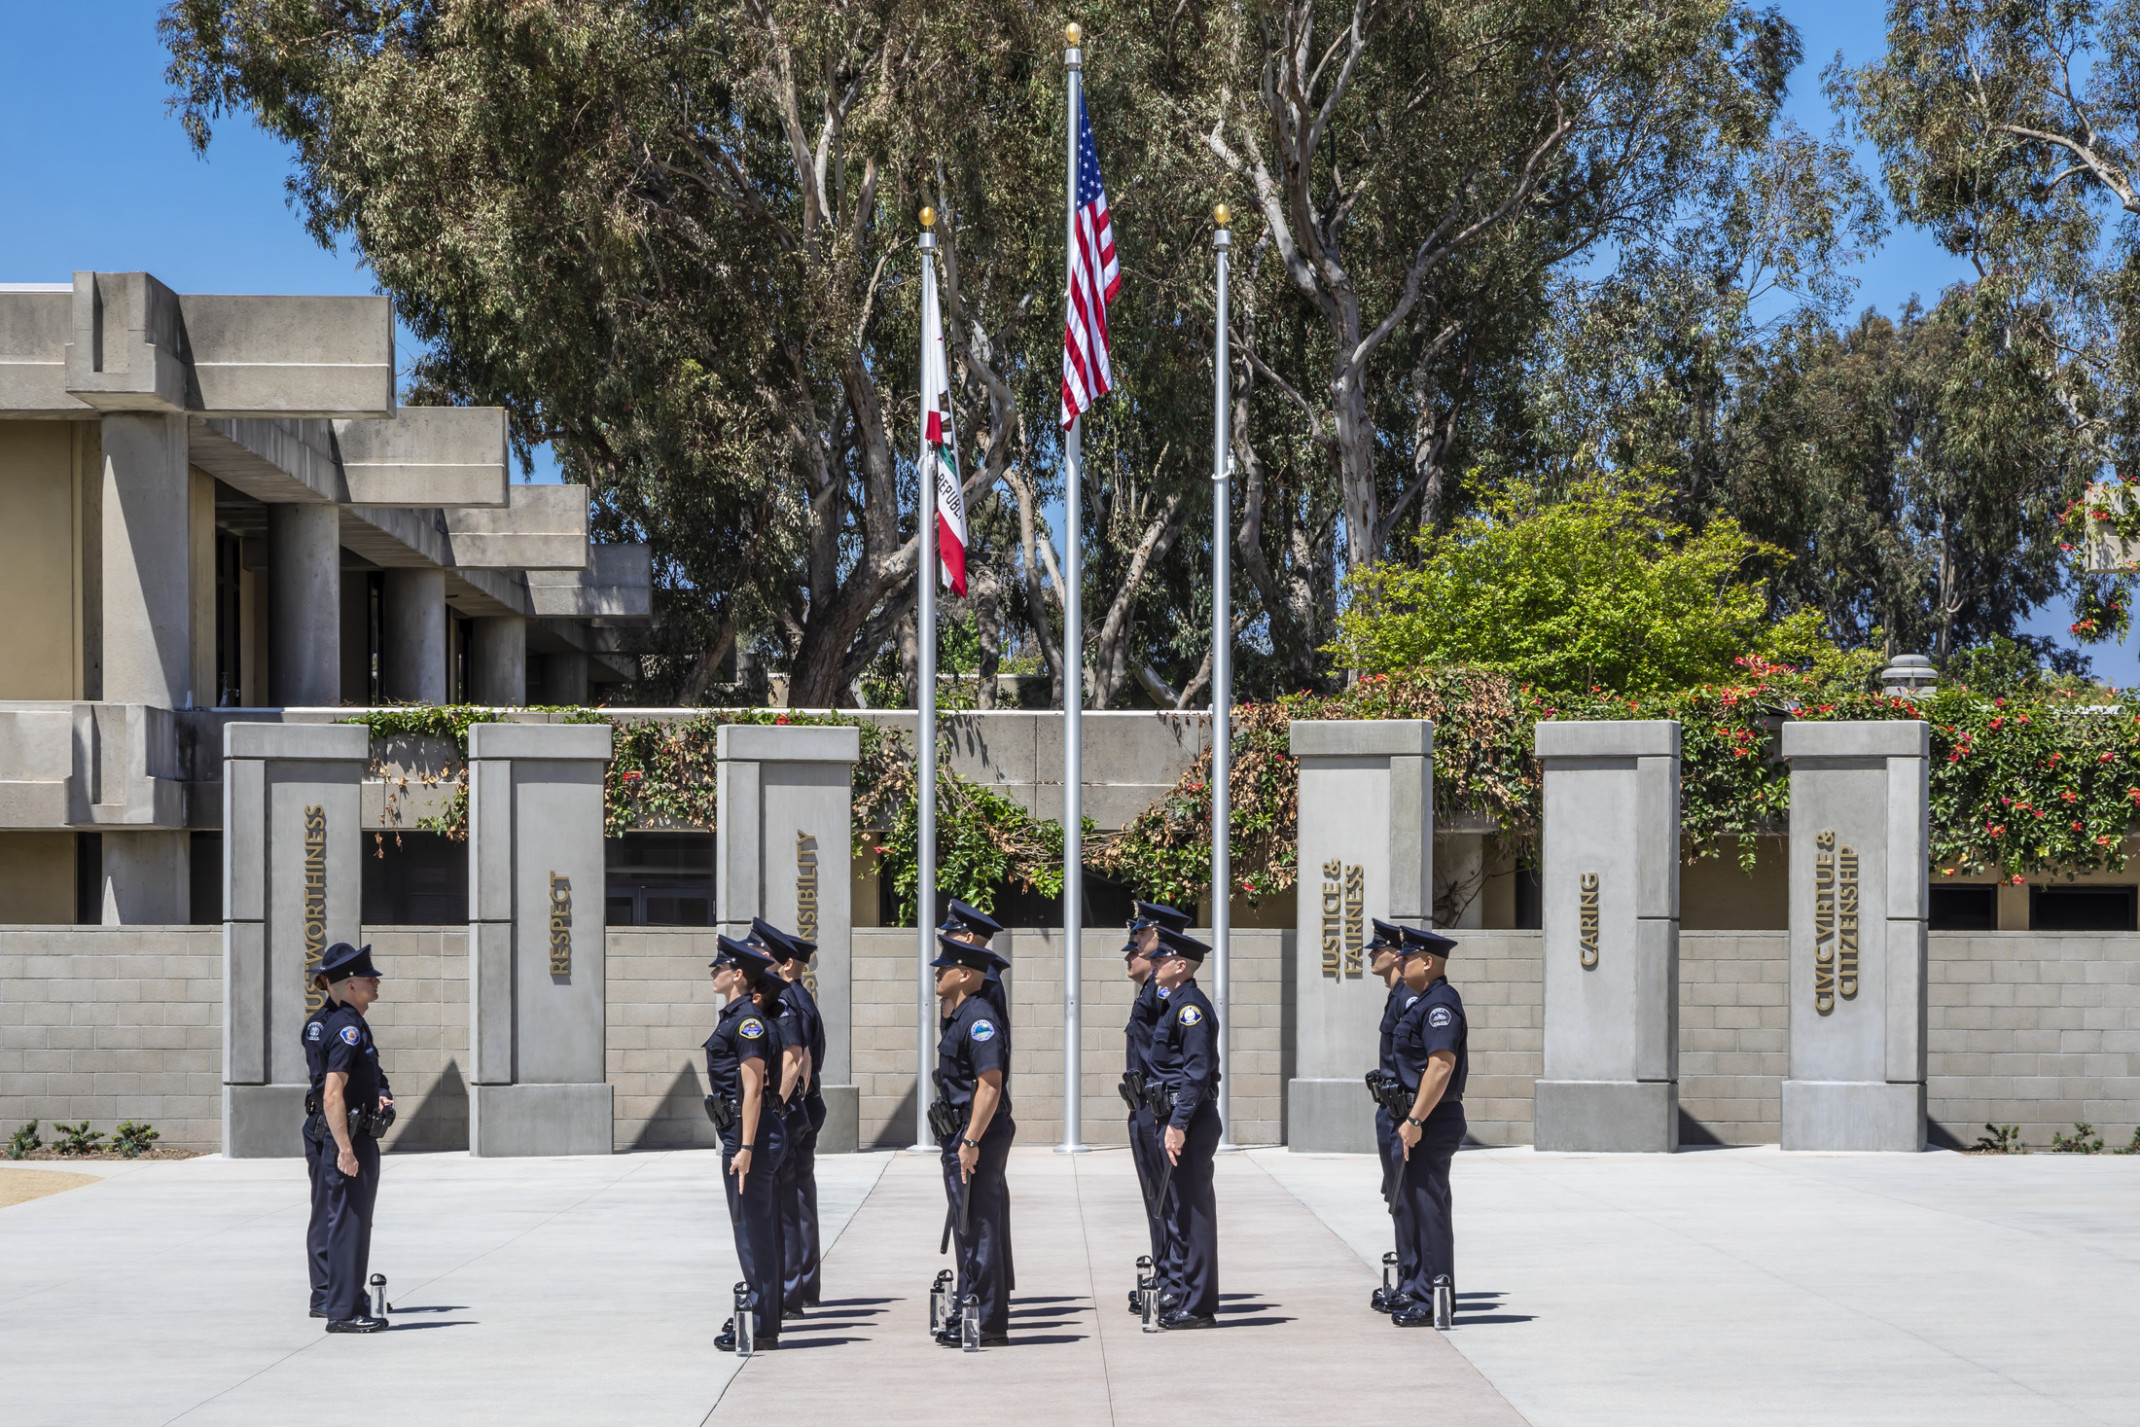 Police officers standing in formation outdoors next to flags and pillars at Golden West College, Regional Public Safety Training Center